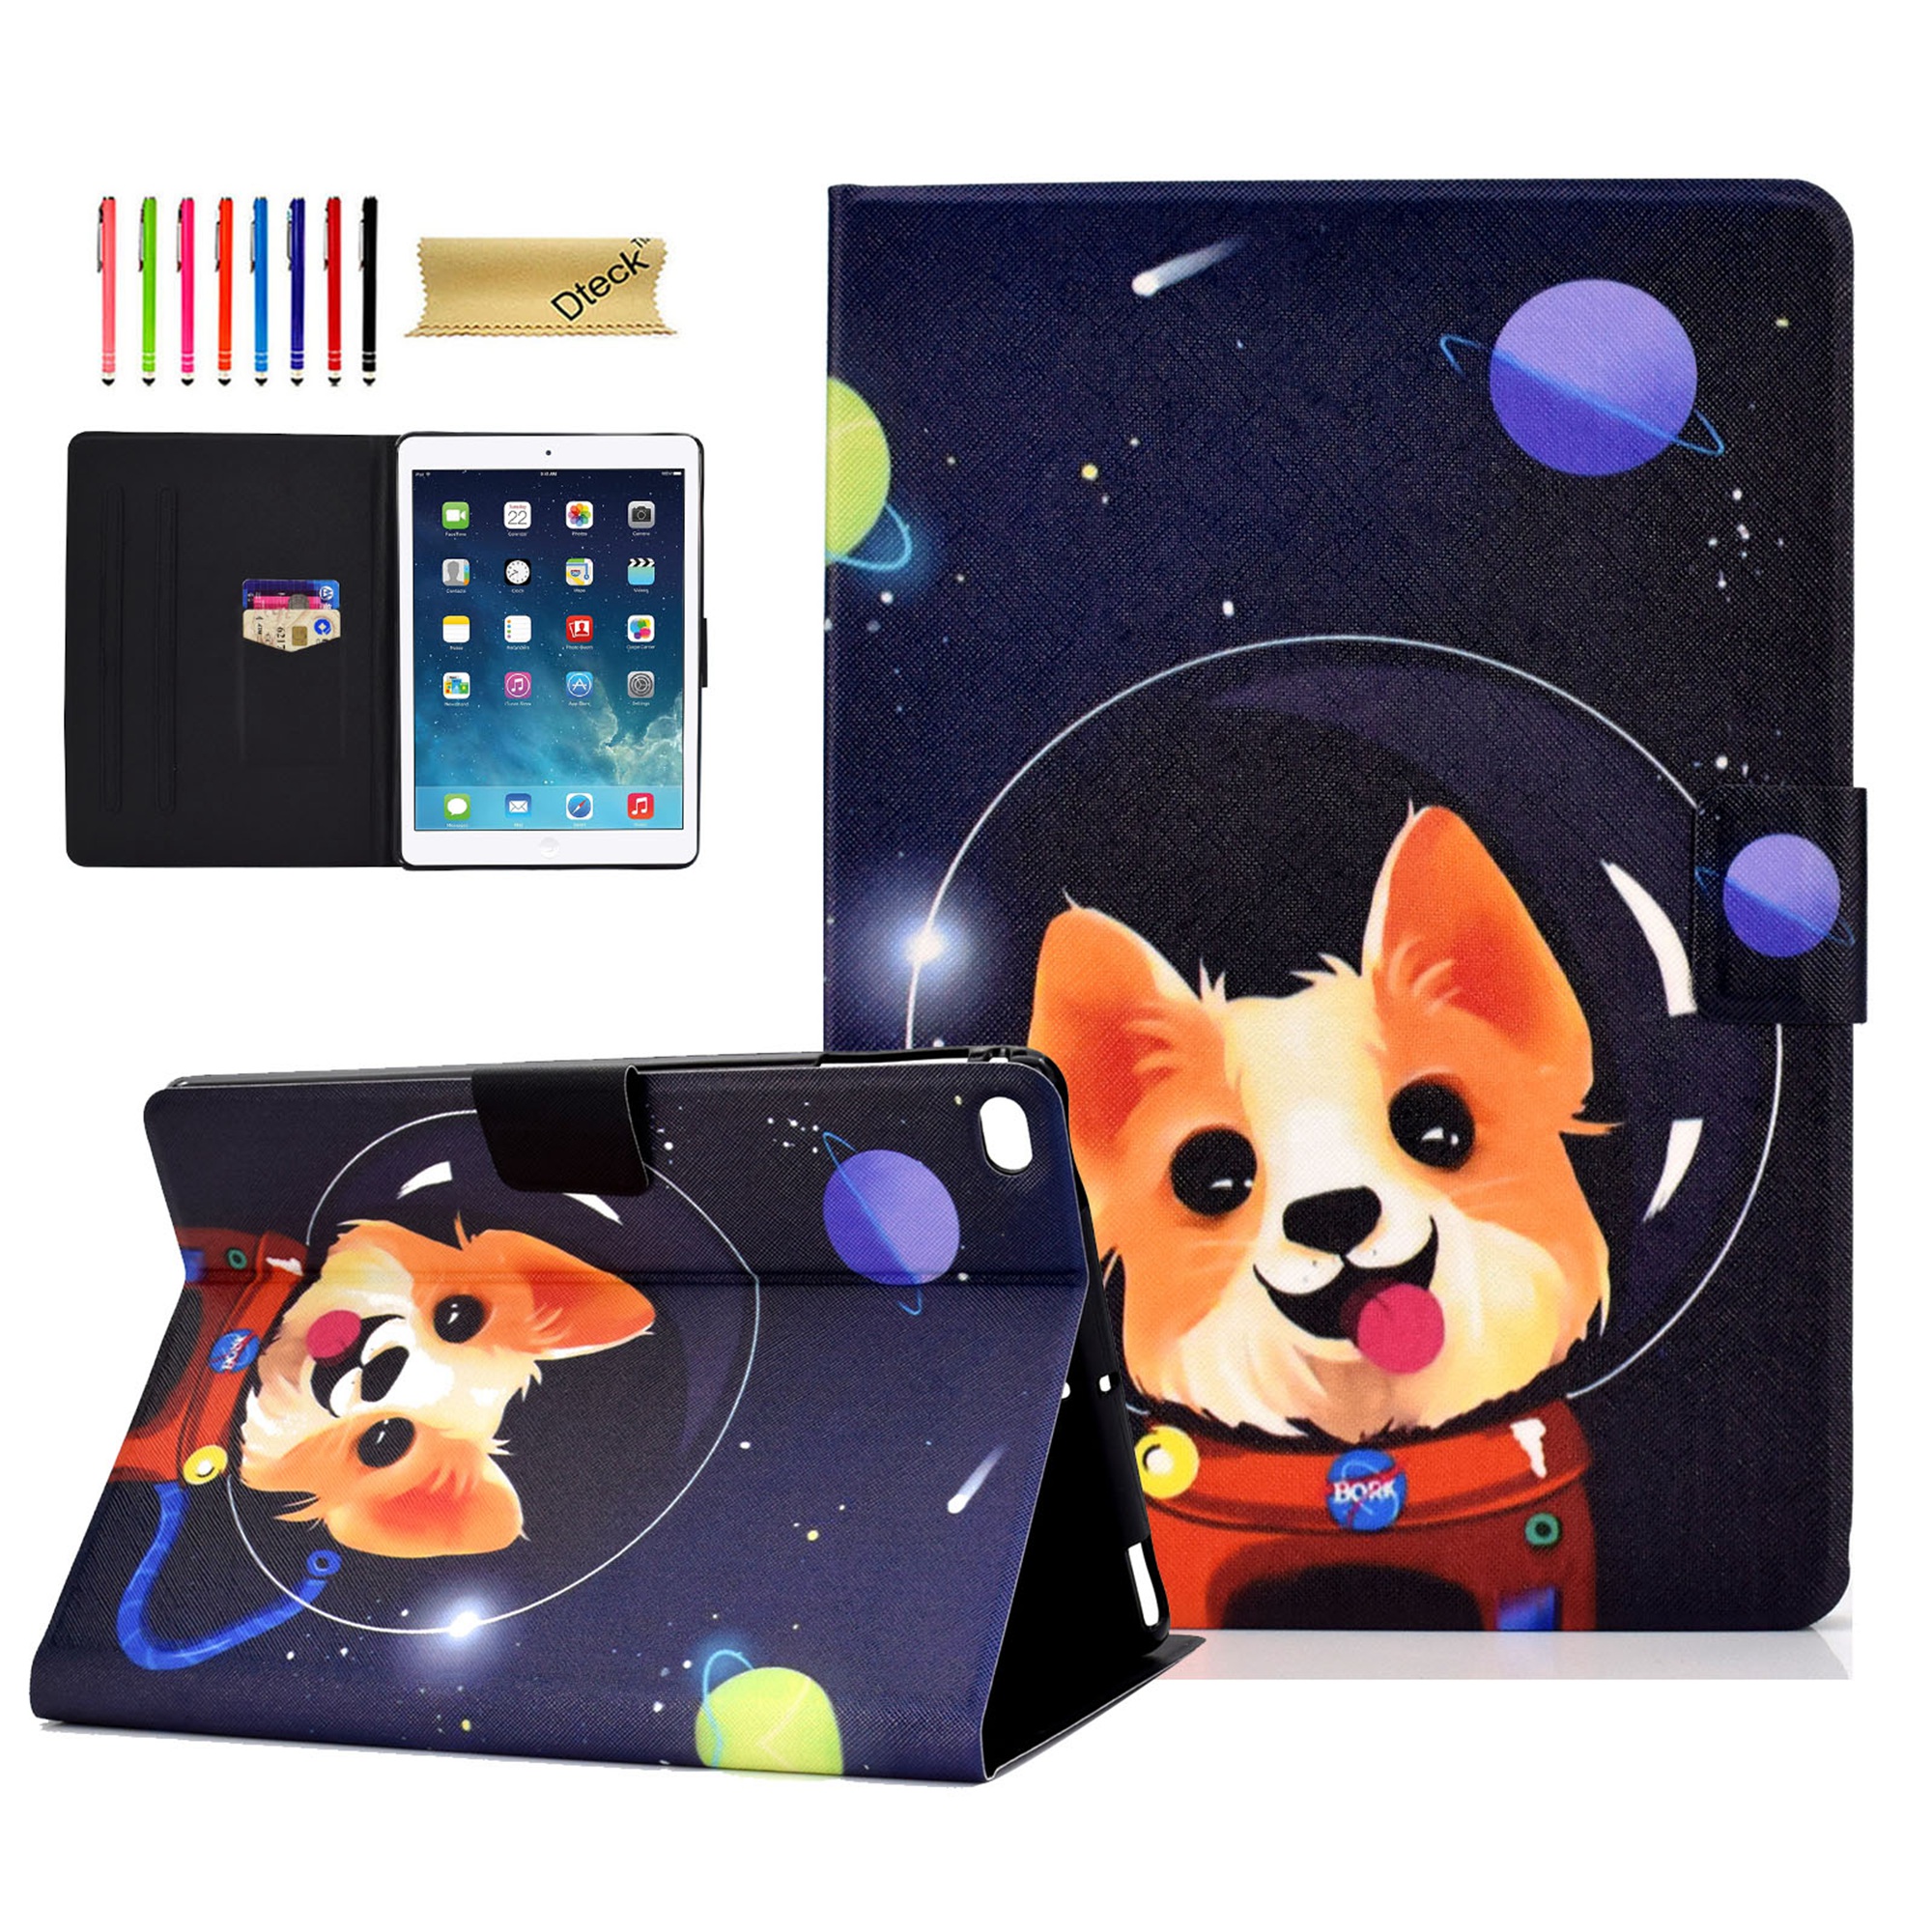 iPad 9.7 inch 2018 2017 Case/iPad Air Case/iPad Air 2 Case/iPad Pro 9.7 Case, Dteck PU Leather Folio Smart Cover with Auto Sleep Wake Stand Wallet Case For Apple iPad 9.7" (Not fit iPad 2 3 4),Dog - image 1 of 1